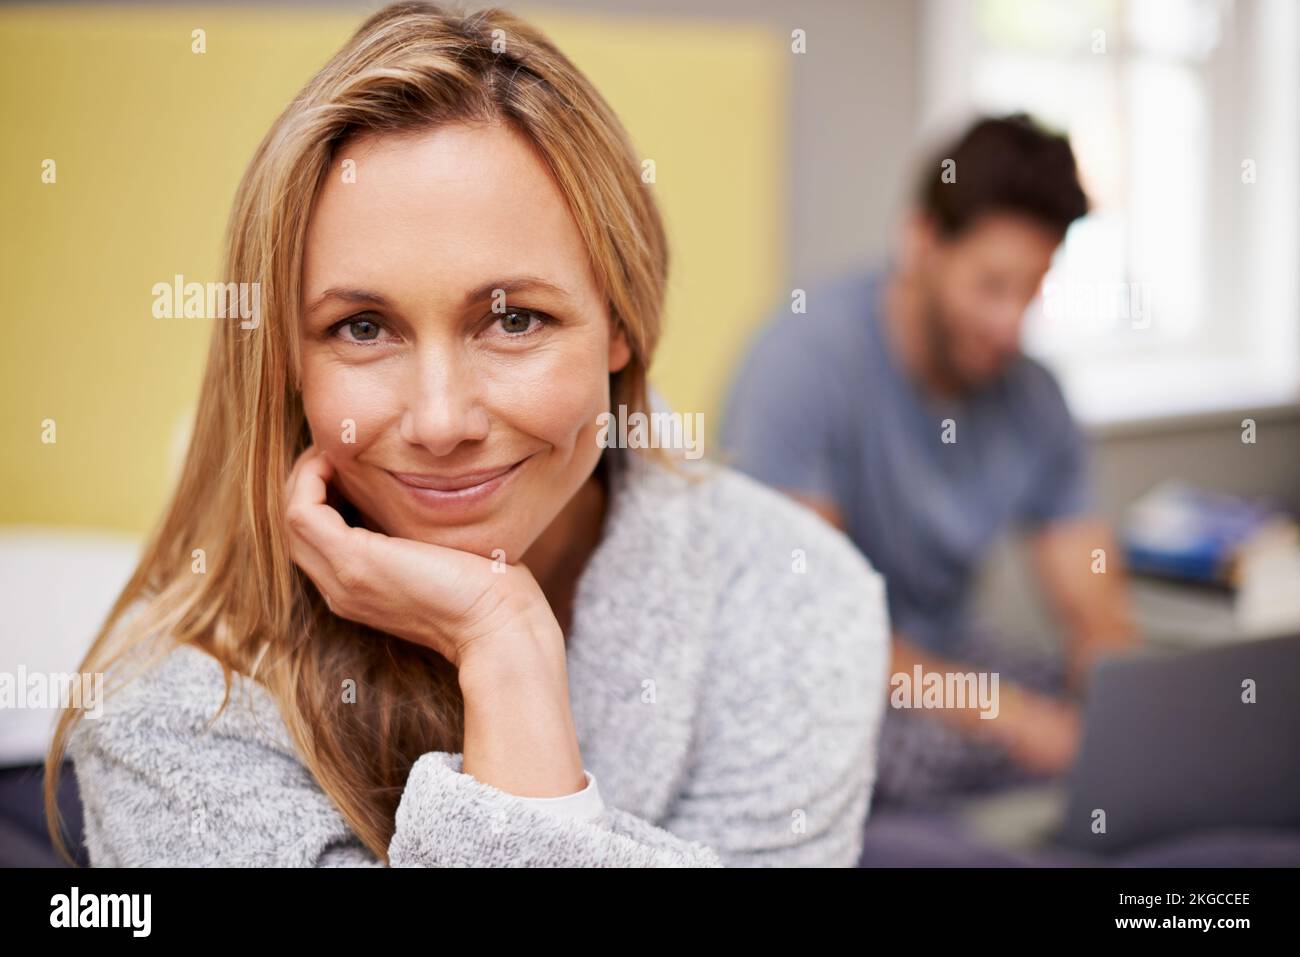 We support each other in our marriage. Portrait of a beautiful woman with her husband sitting in the background. Stock Photo